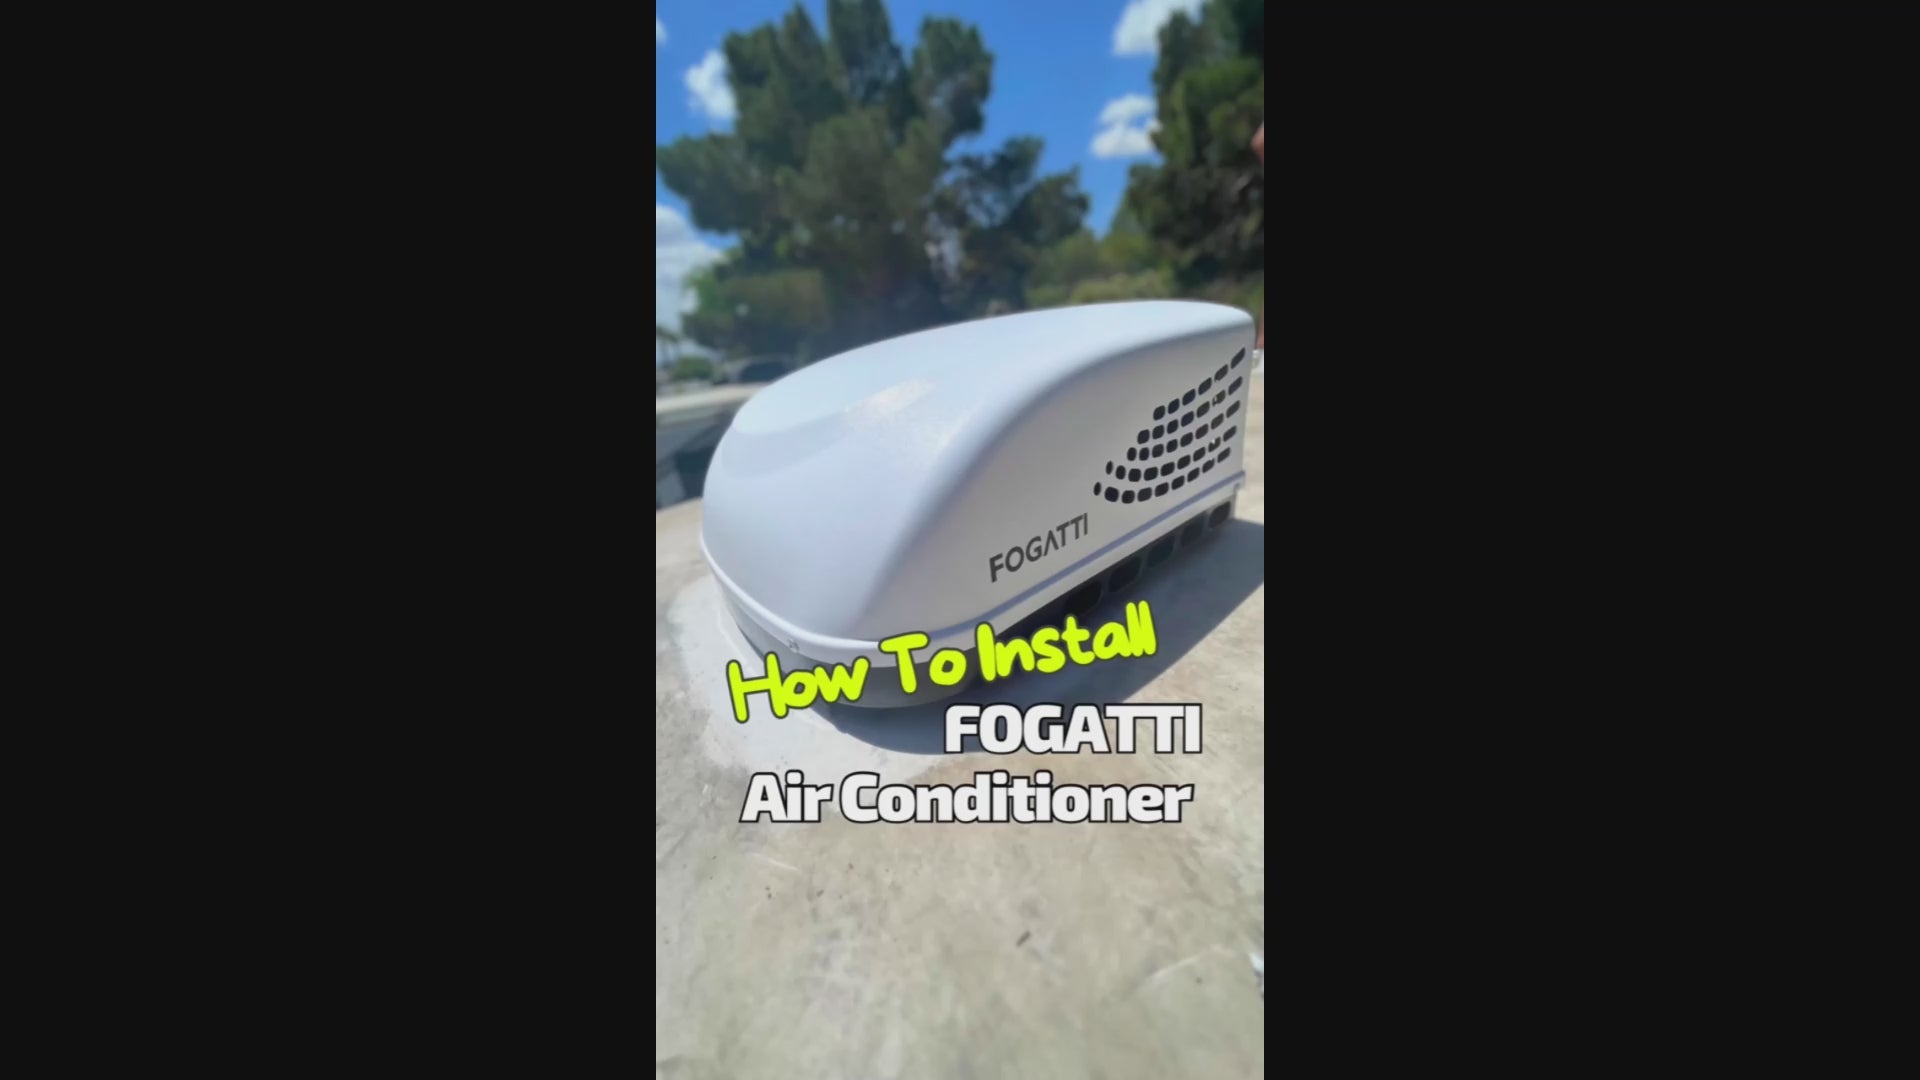 Fogatti InstaCool 150P Ⅱ RV Rooftop Air Conditioner | Heat Strip | Replaceable Ducted and Non-Ducted RV AC